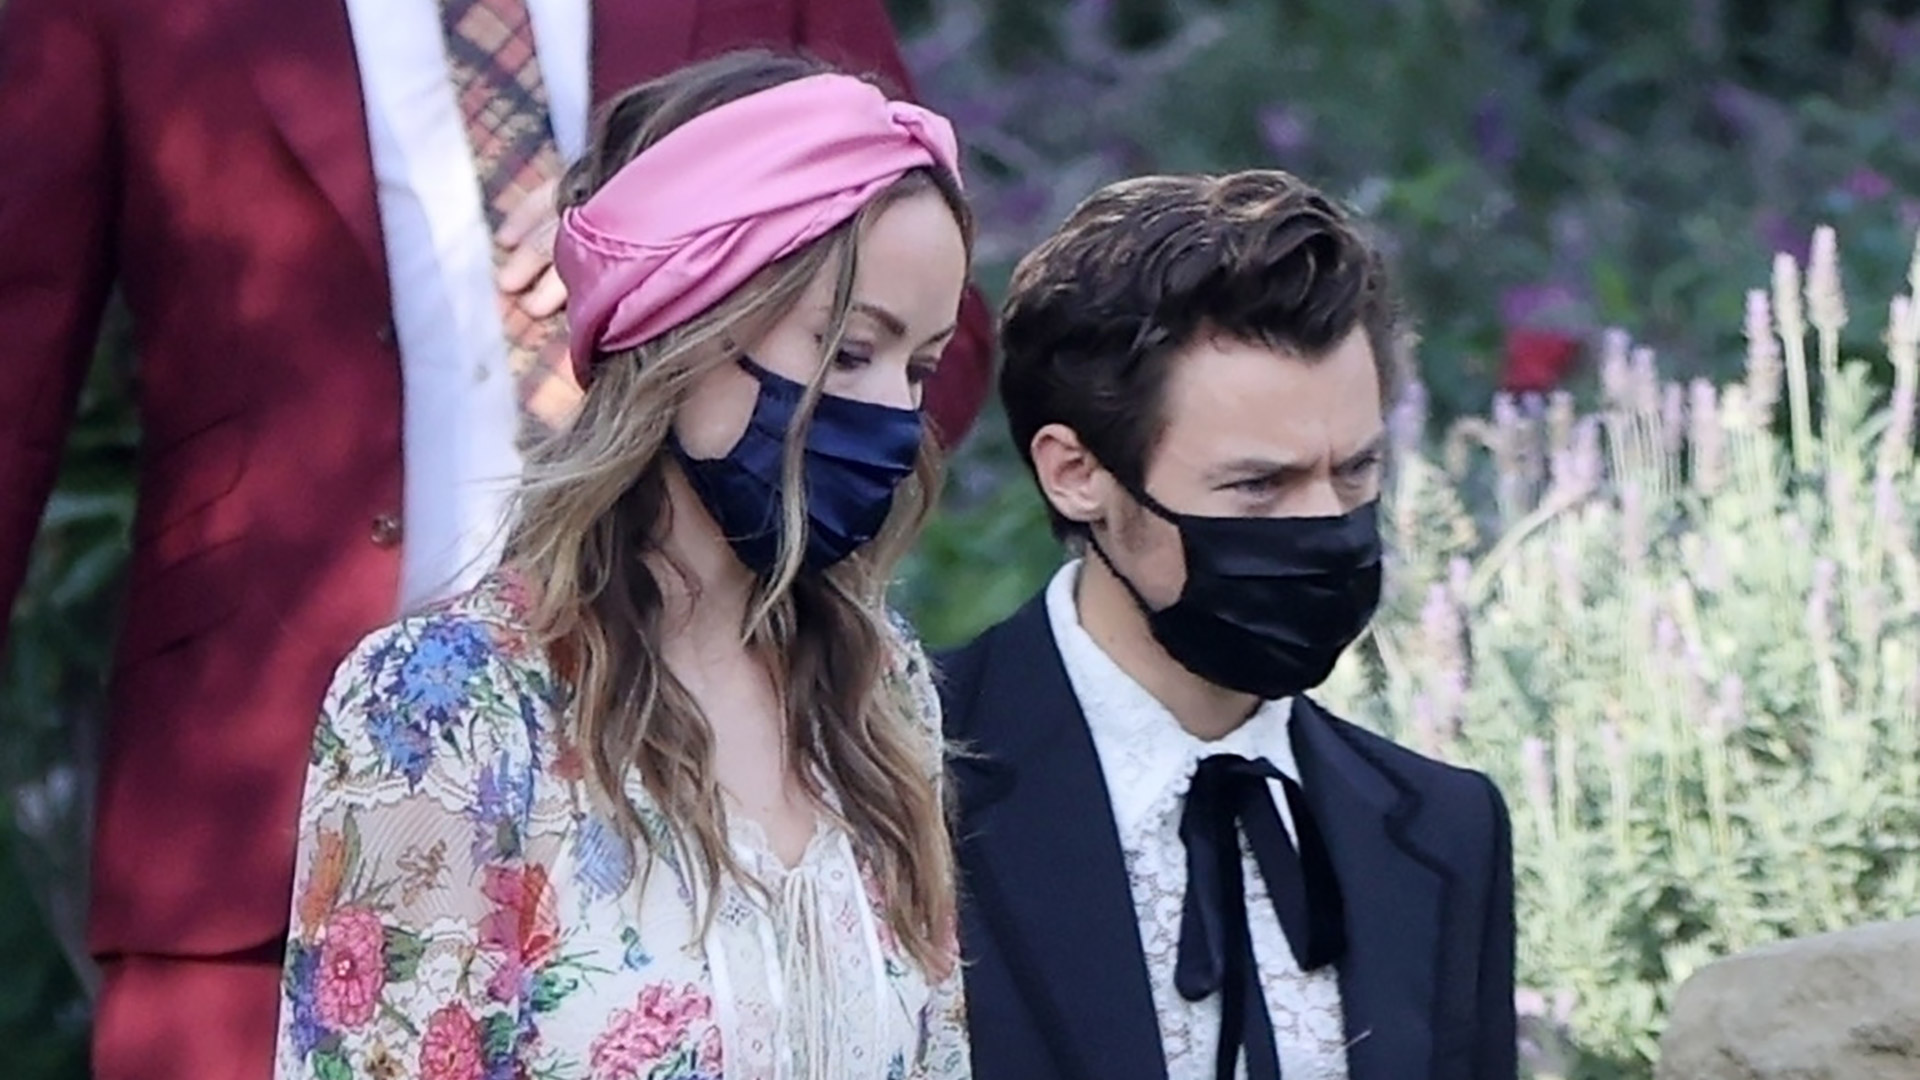 Photo © 2021 Backgrid/The Grosby GroupMontecito, CA   *PREMIUM-EXCLUSIVE*  Hot new couple alert! Harry Styles is seen holding on to new love, and co-star Olivia Wilde  as they attend the wedding of his agent, Jeffrey Azoff and Glenne Christiaansen. The lady-killing pop-star and the recently separated mother of two, locked hands as they left their hotel room dressed to the nines to meet up with the wedding party in Montecito, CA.